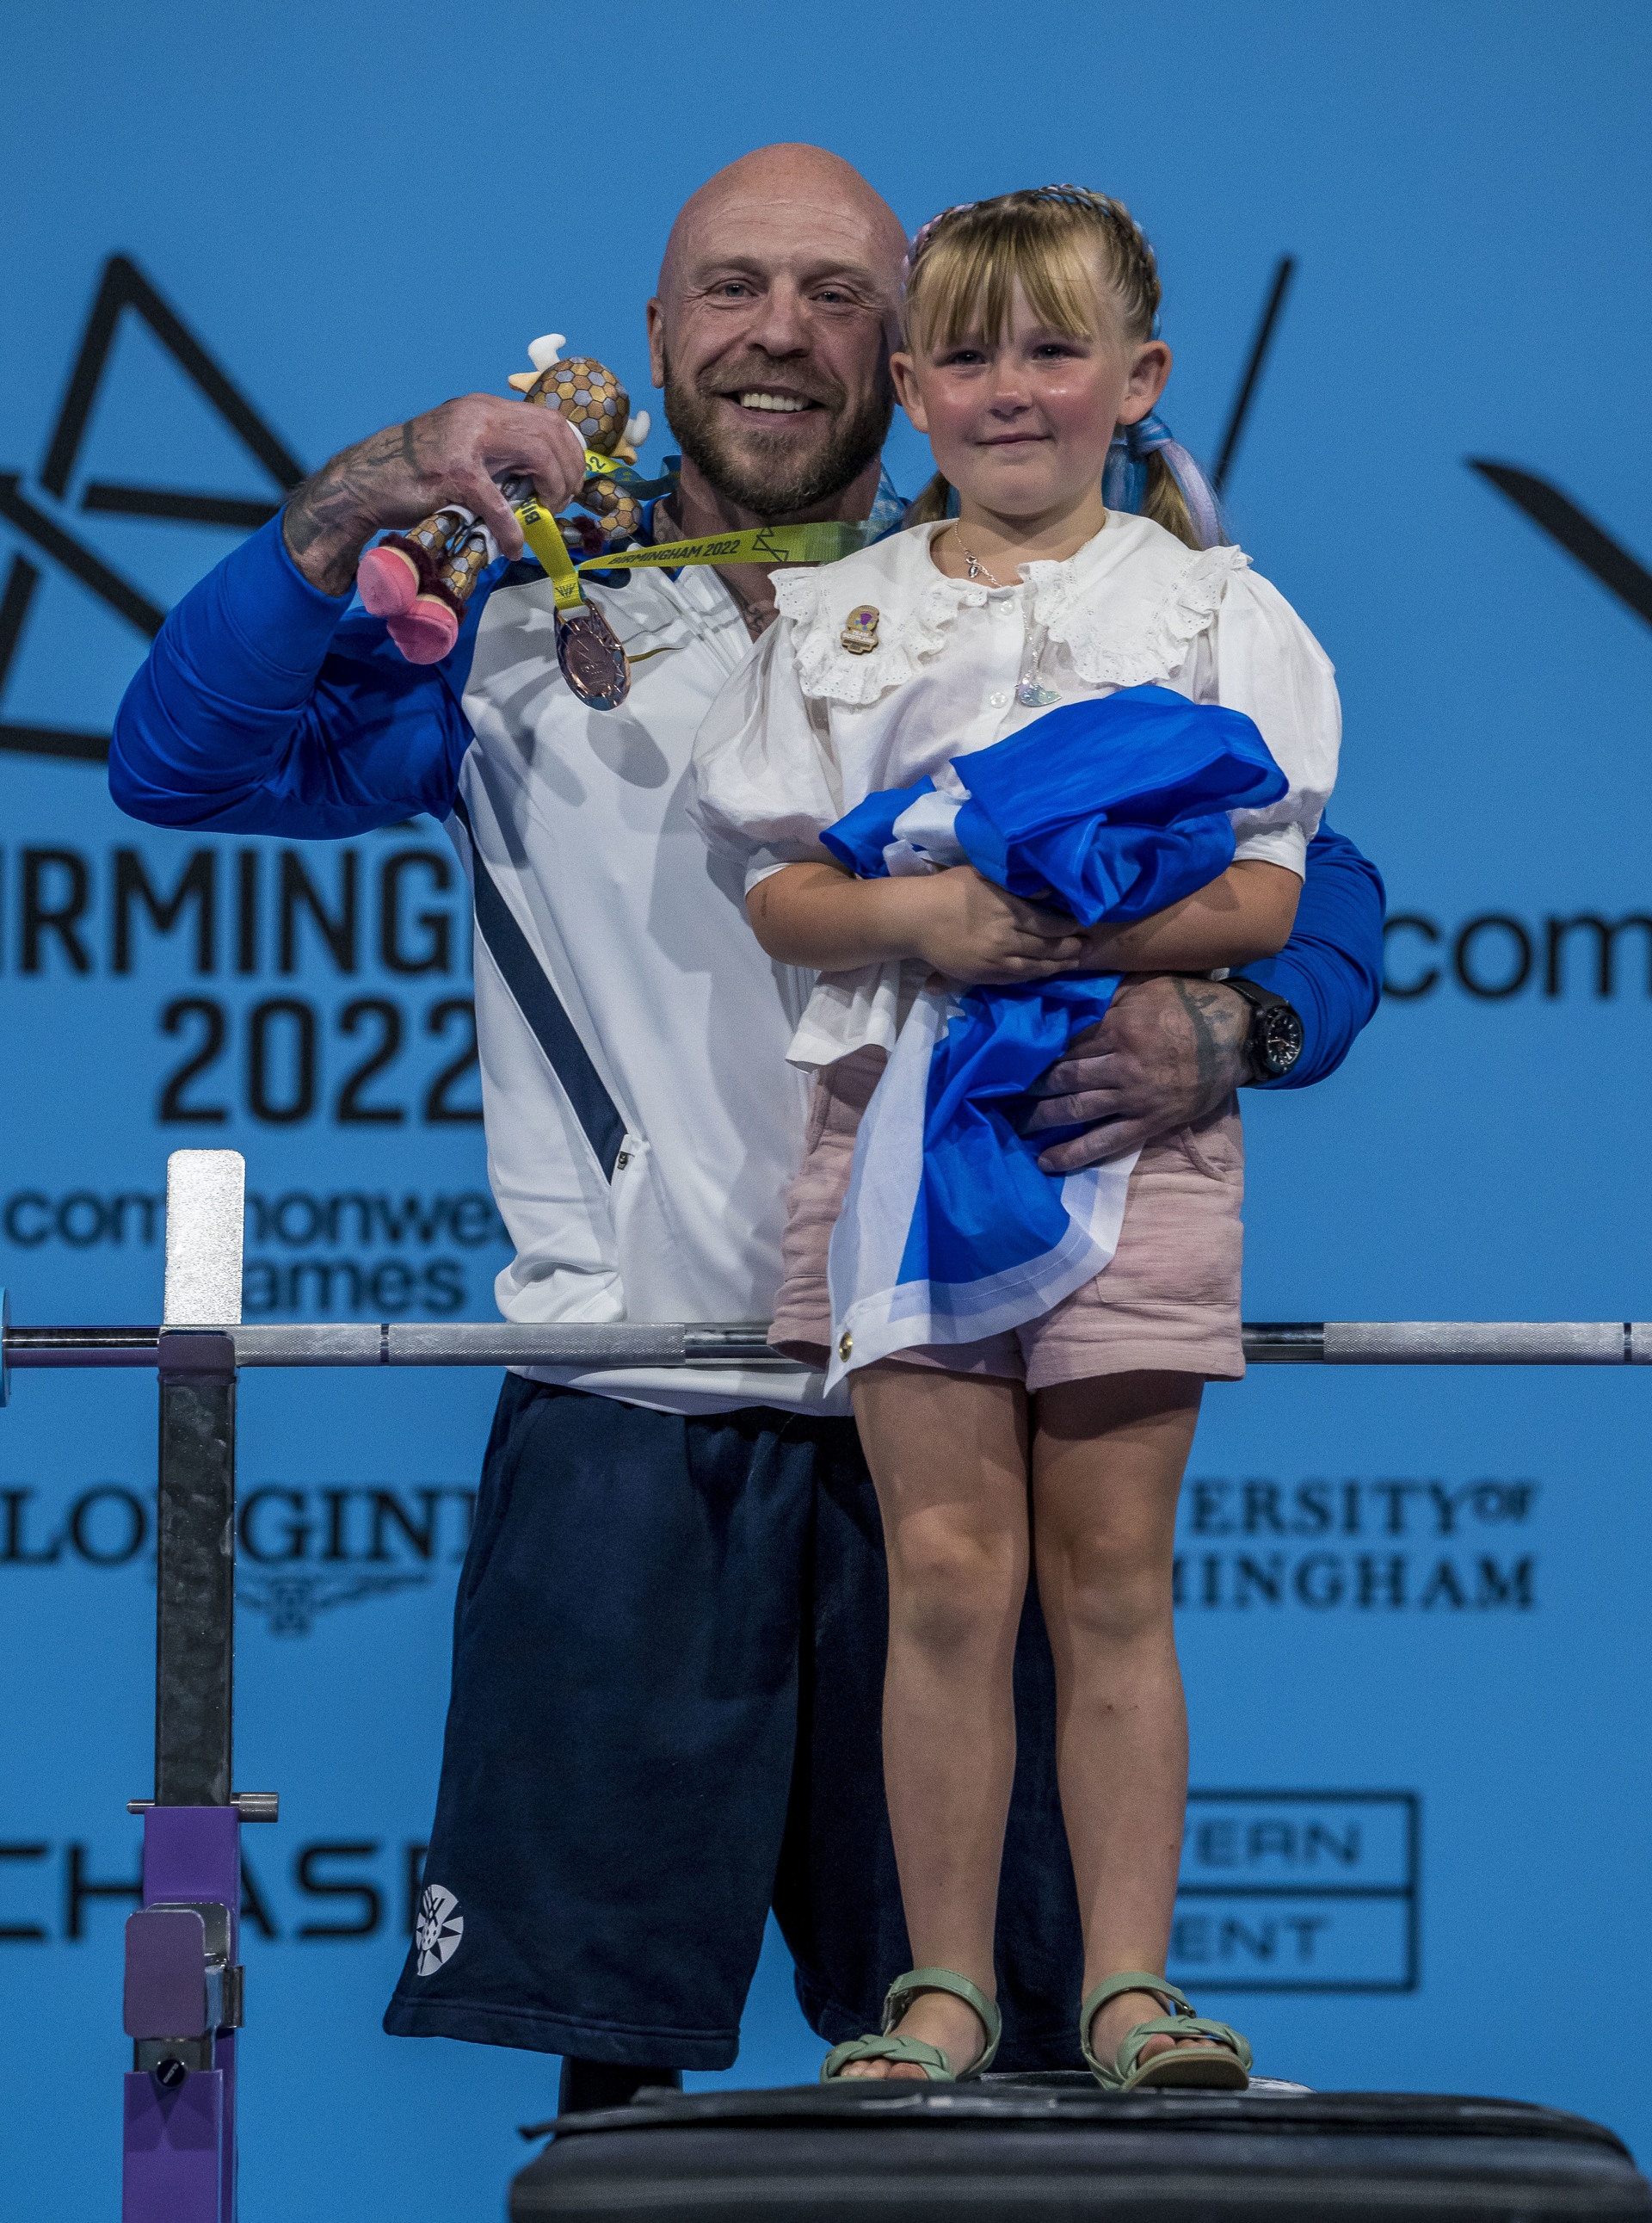 Yule's daughter Tilly was there to roar her dad to Commonwealth Games bronze. (Image: Craig Watson/Team Scotland)